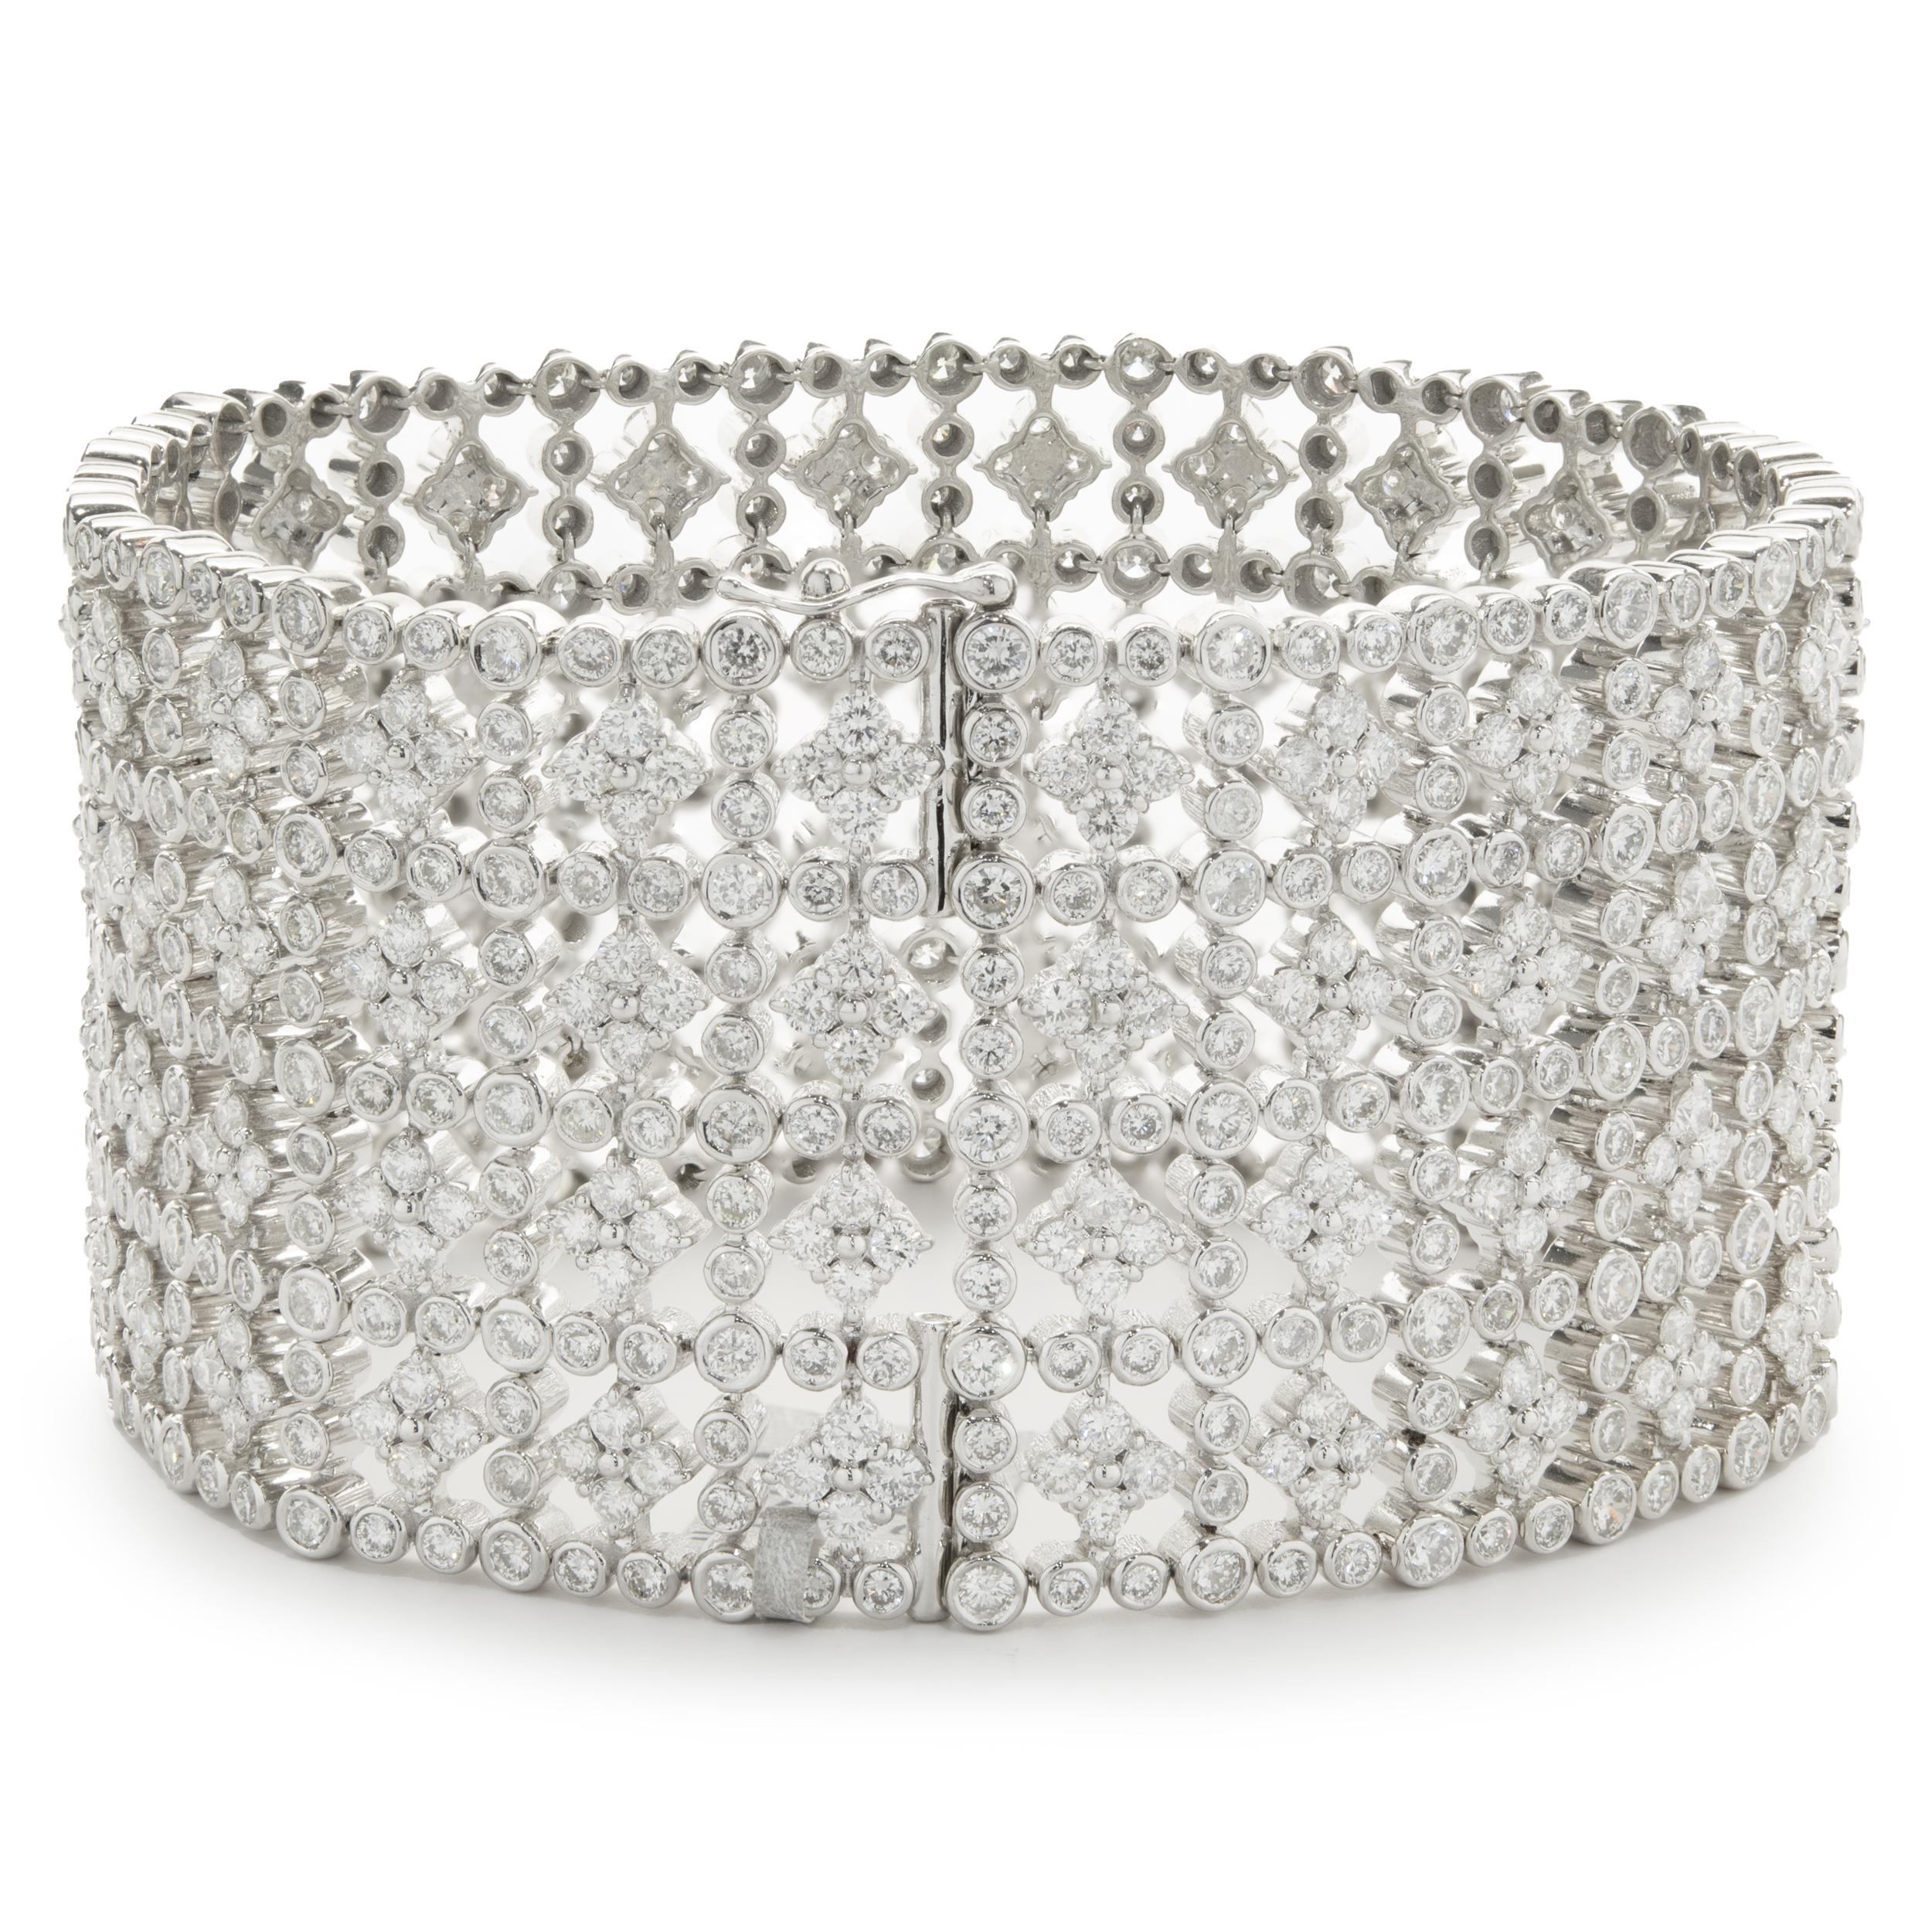 Designer: custom design
Material: 14K white gold
Diamonds: 866 round brilliant cut = 28.91cttw
Color: F / G
Clarity: VS1-2
Dimensions: bracelet measures 7.25-inches in length 
Weight: 89.55 grams
